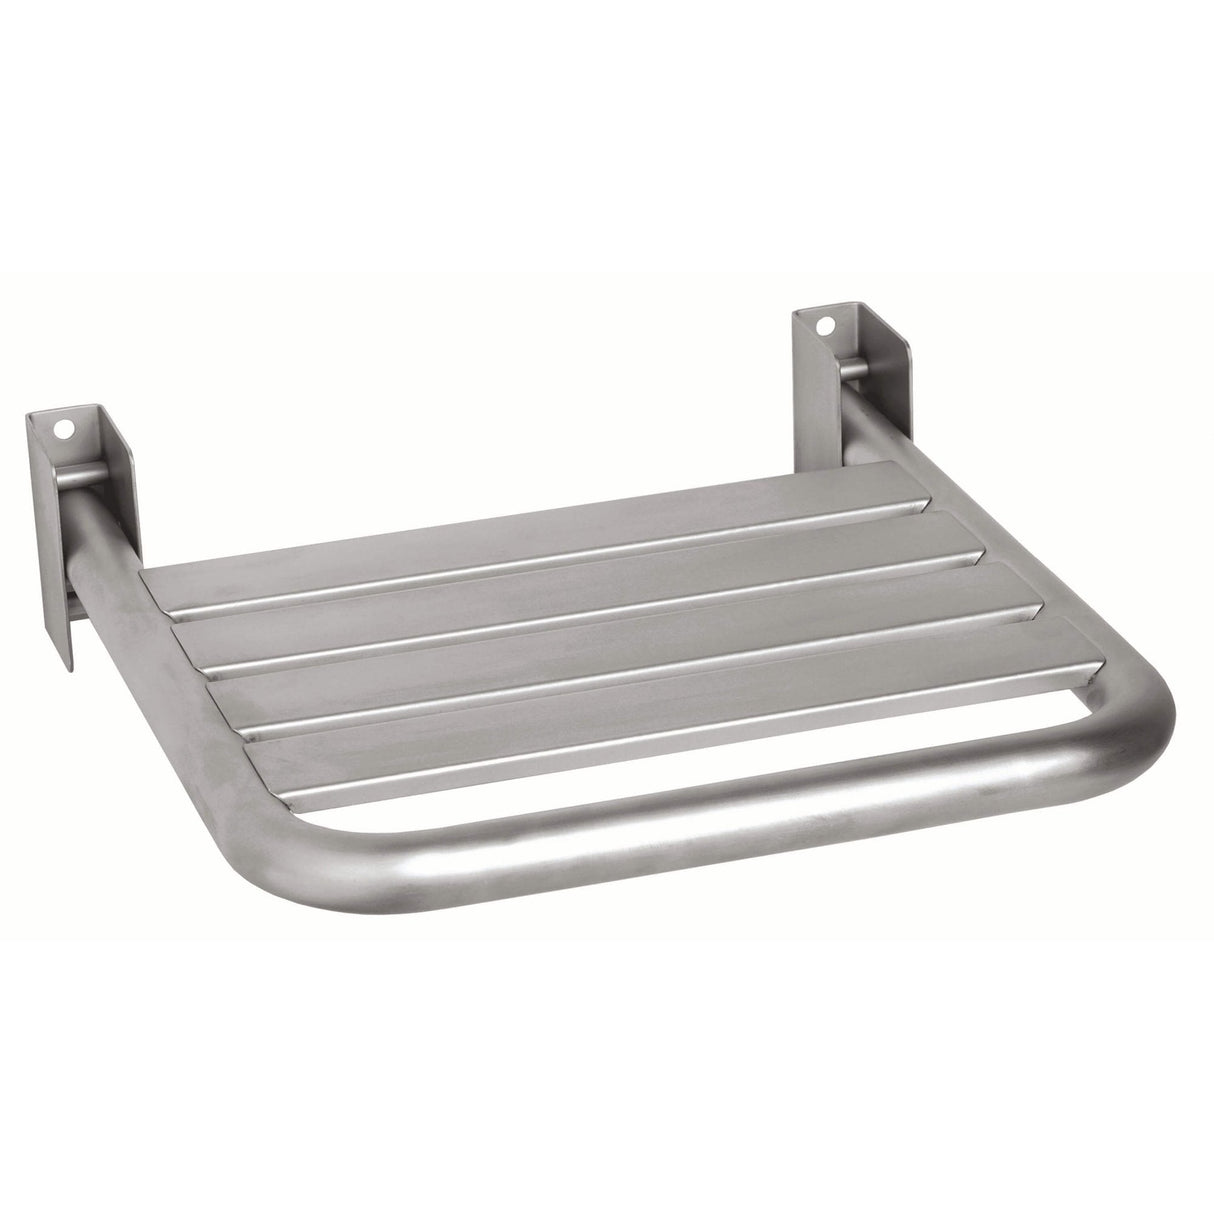 Folding Shower Seat with Slots